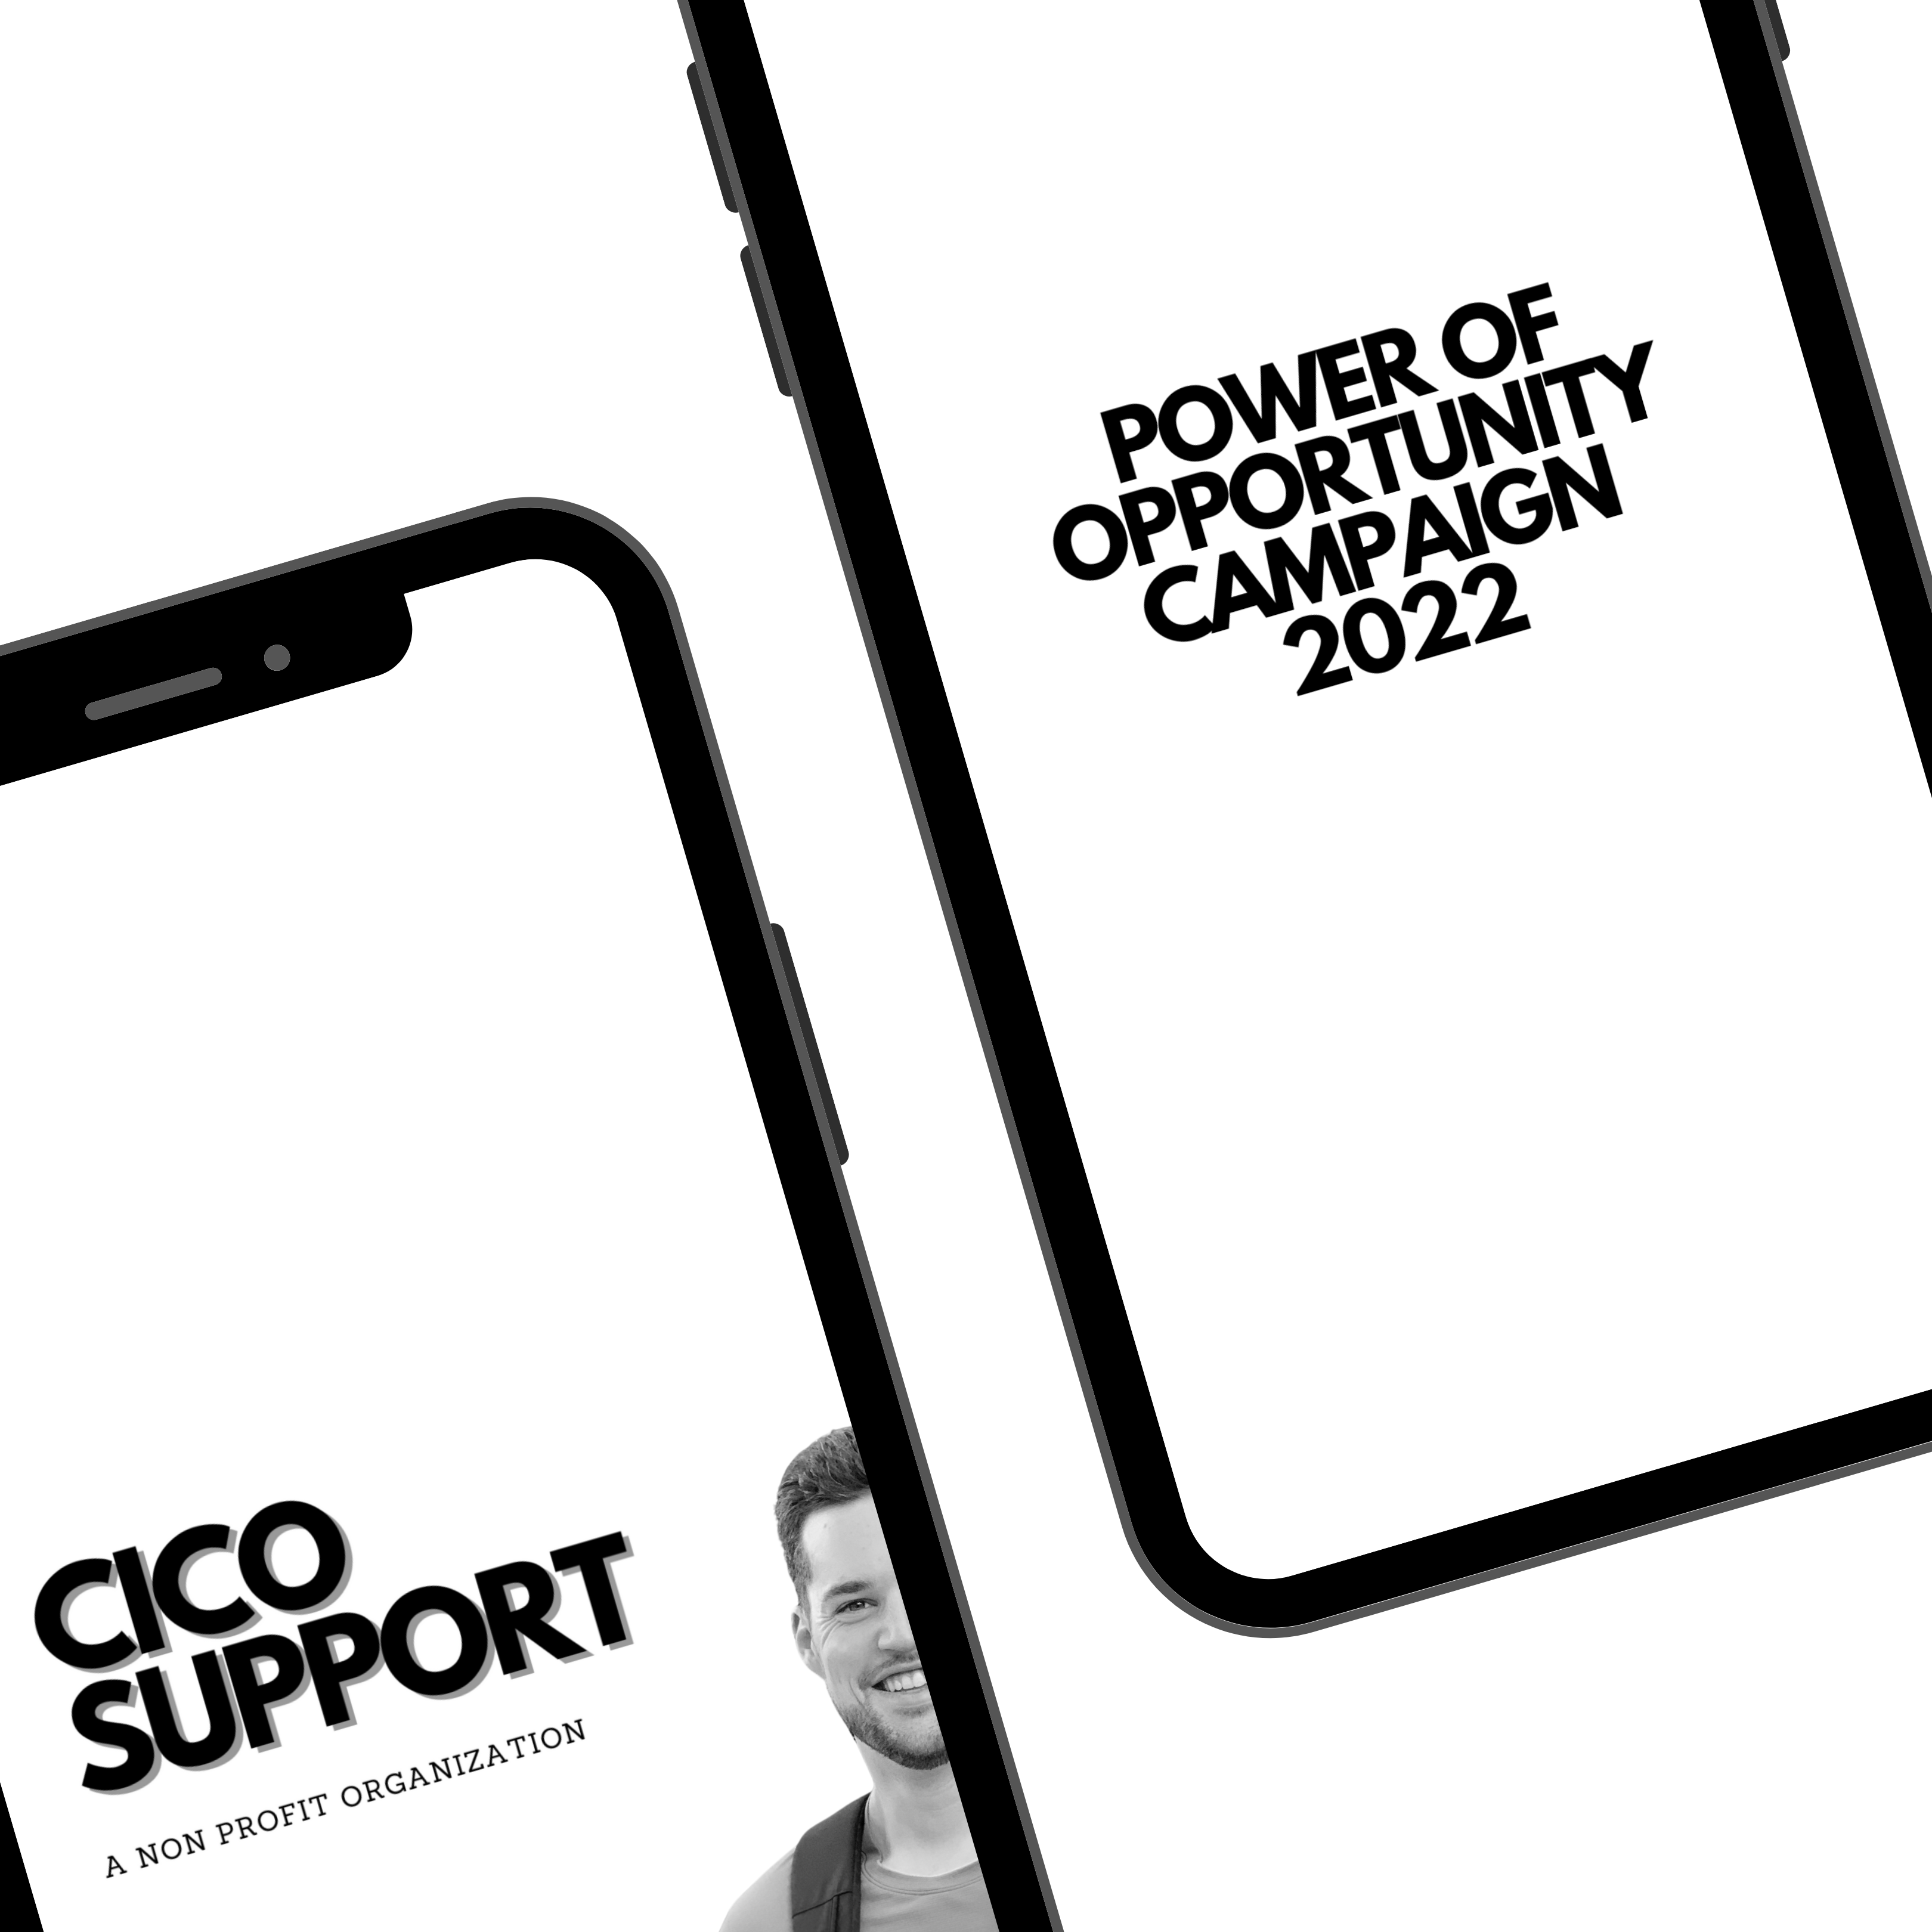 The CICO Support Organization Announces A Brand New Campaign Giving Opportunity Back To The People That Need It.